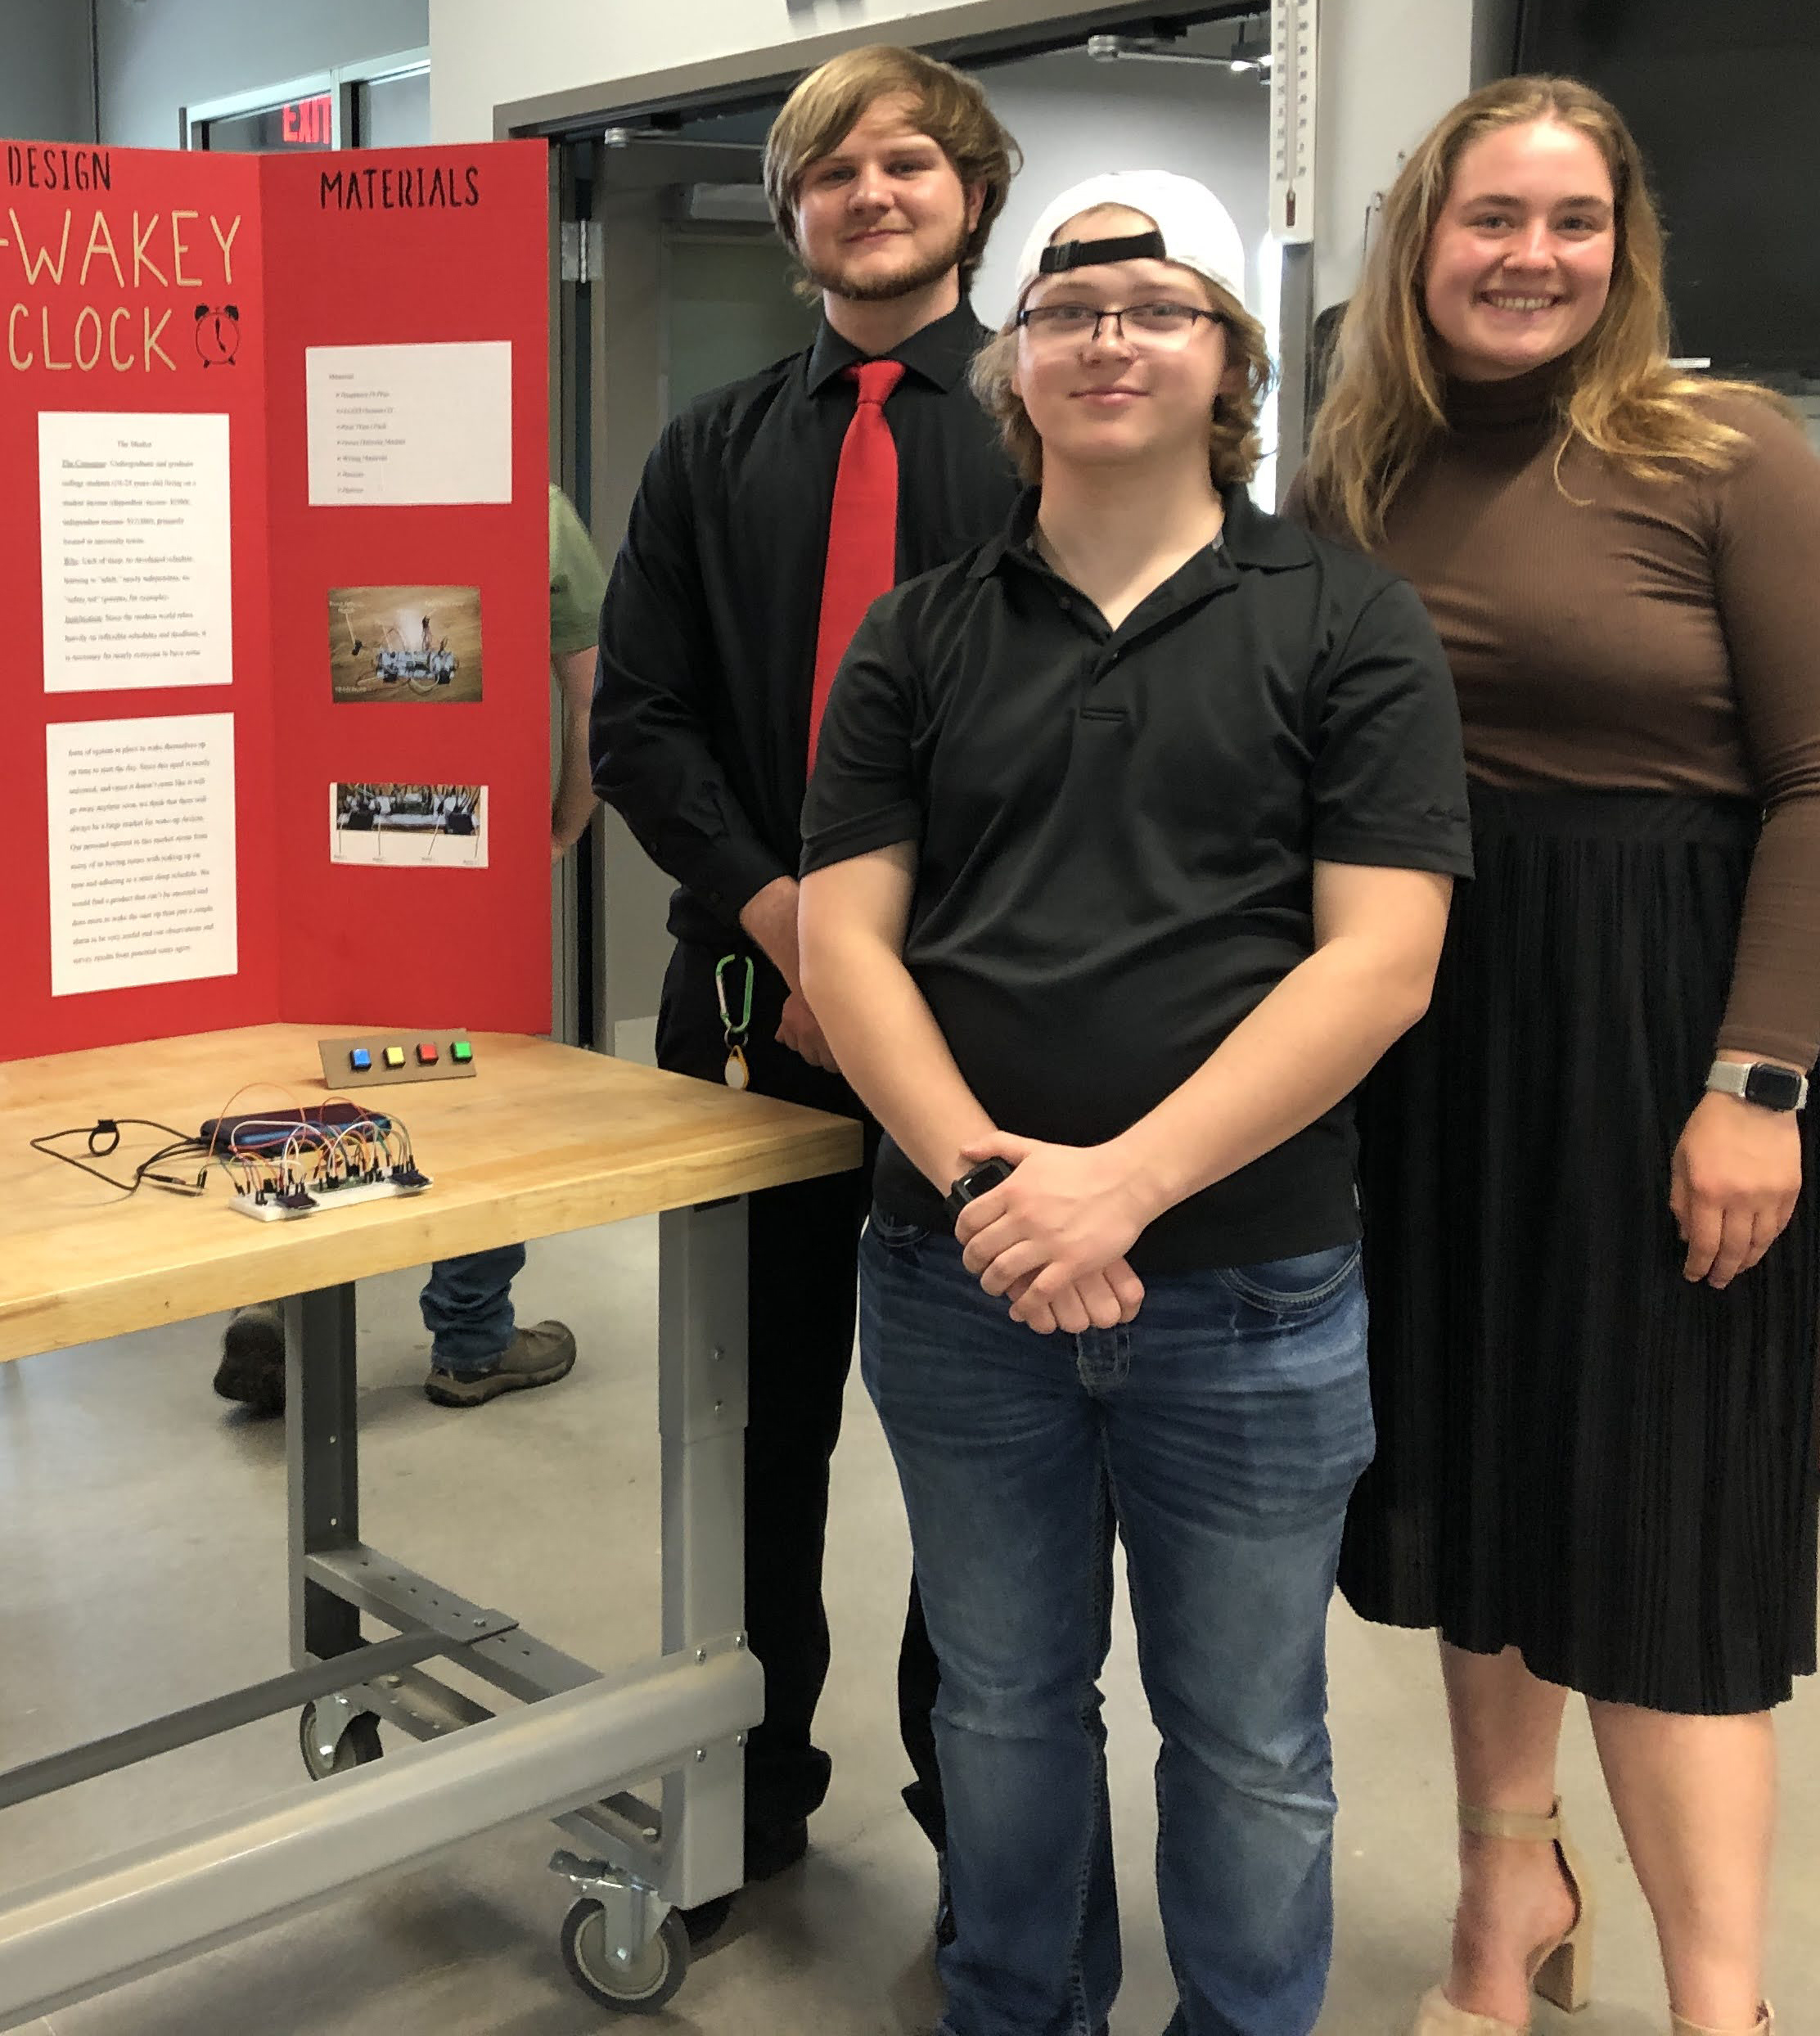 A team of students proudly stands next to their project display board and prototype.